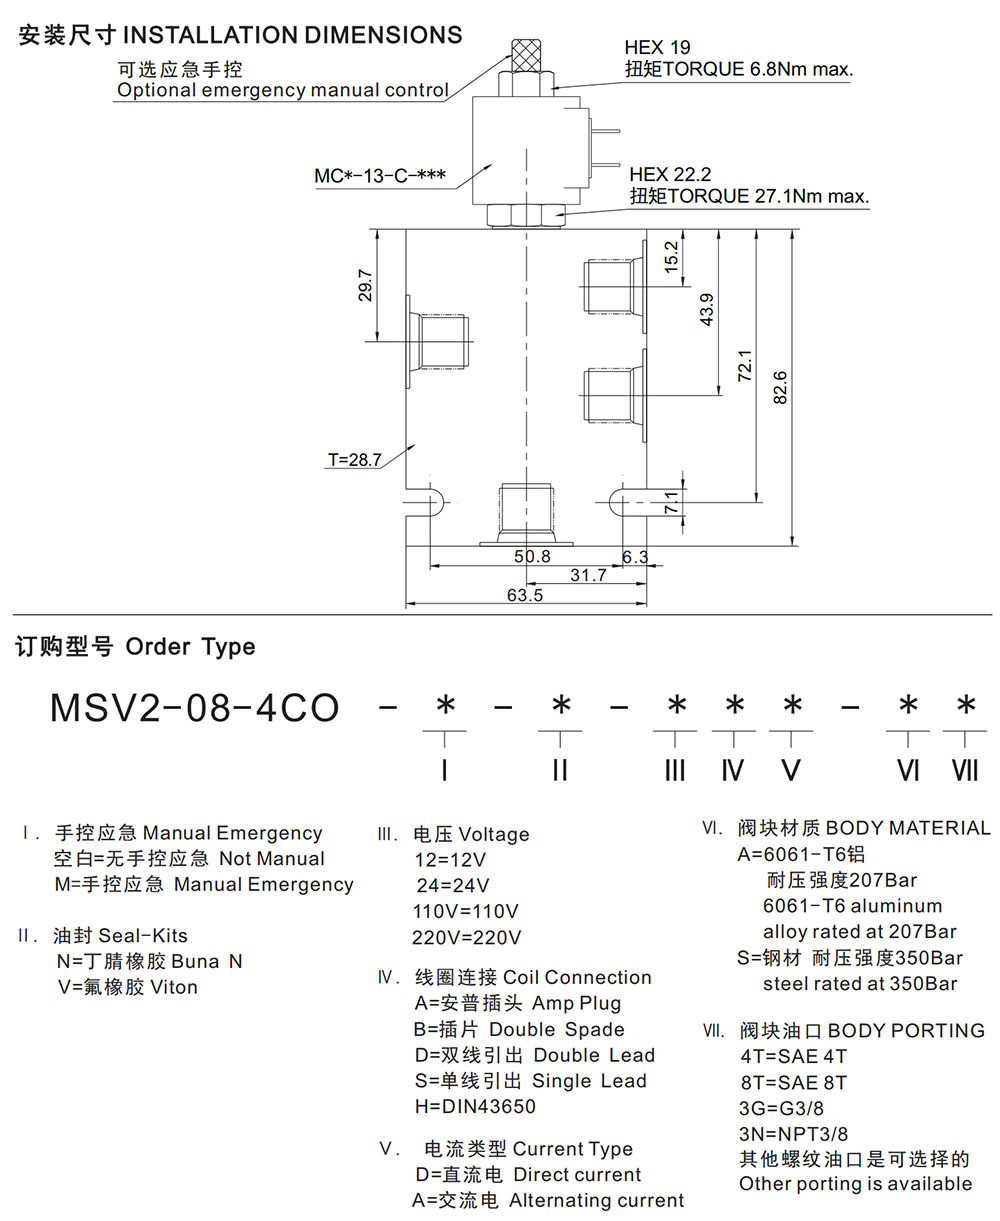 MSV2-08-4CO